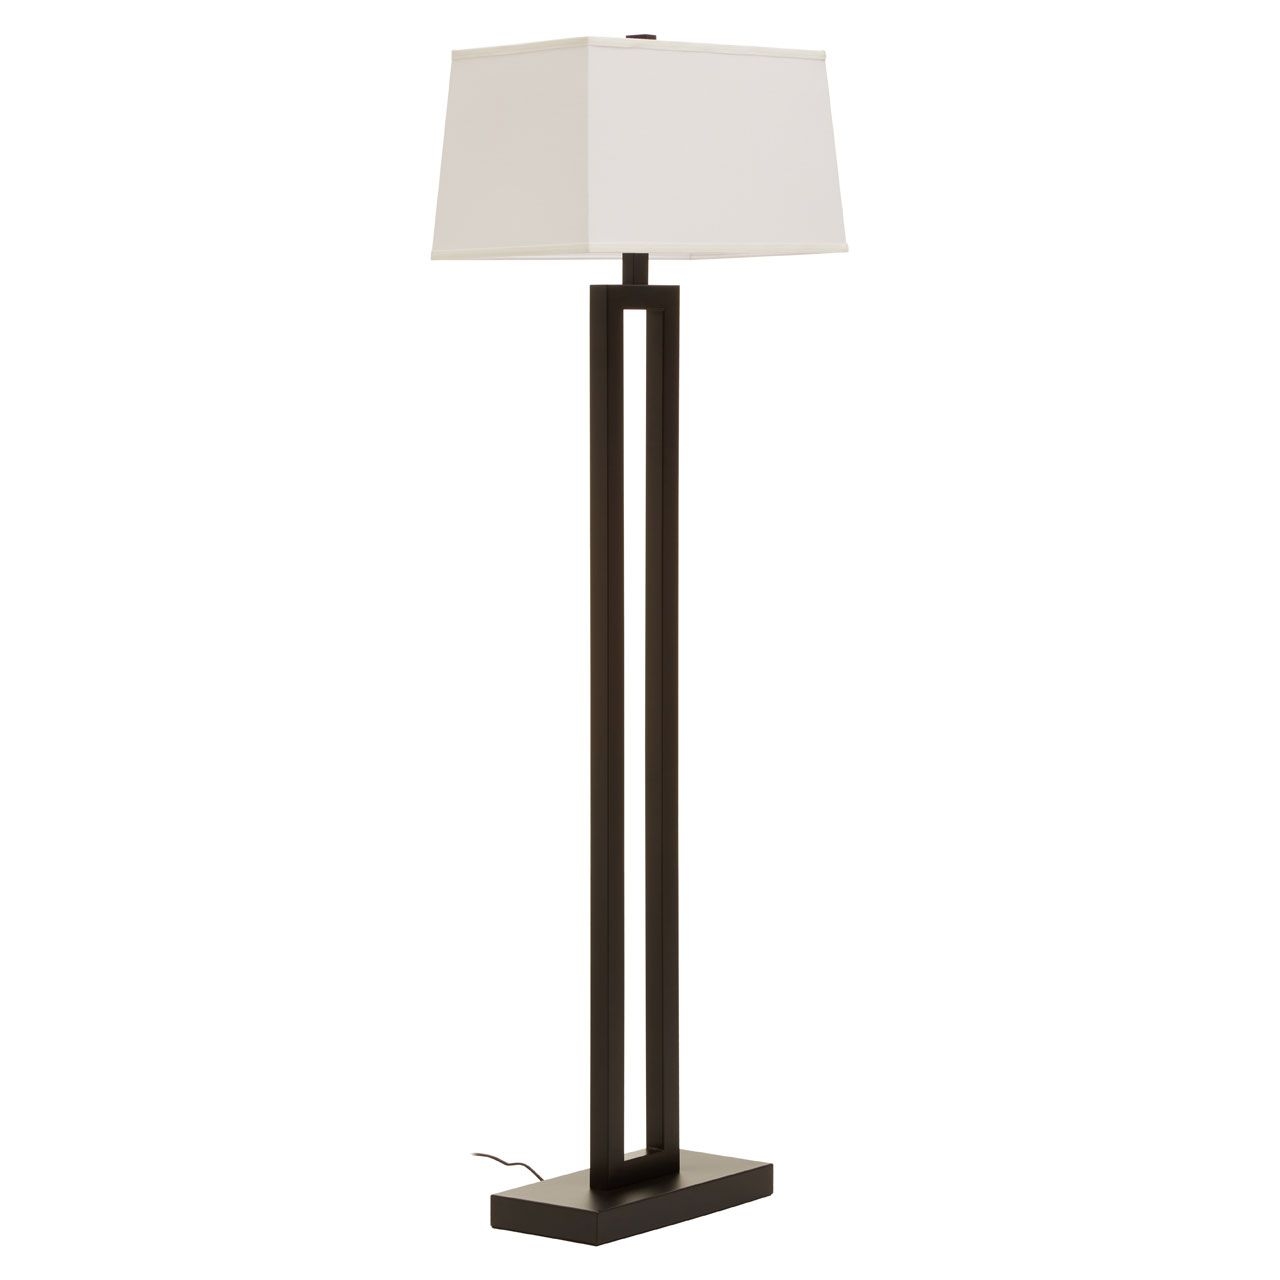 Leora White Fabric Shade Floor Lamp In Black Metal Cut Out Stand